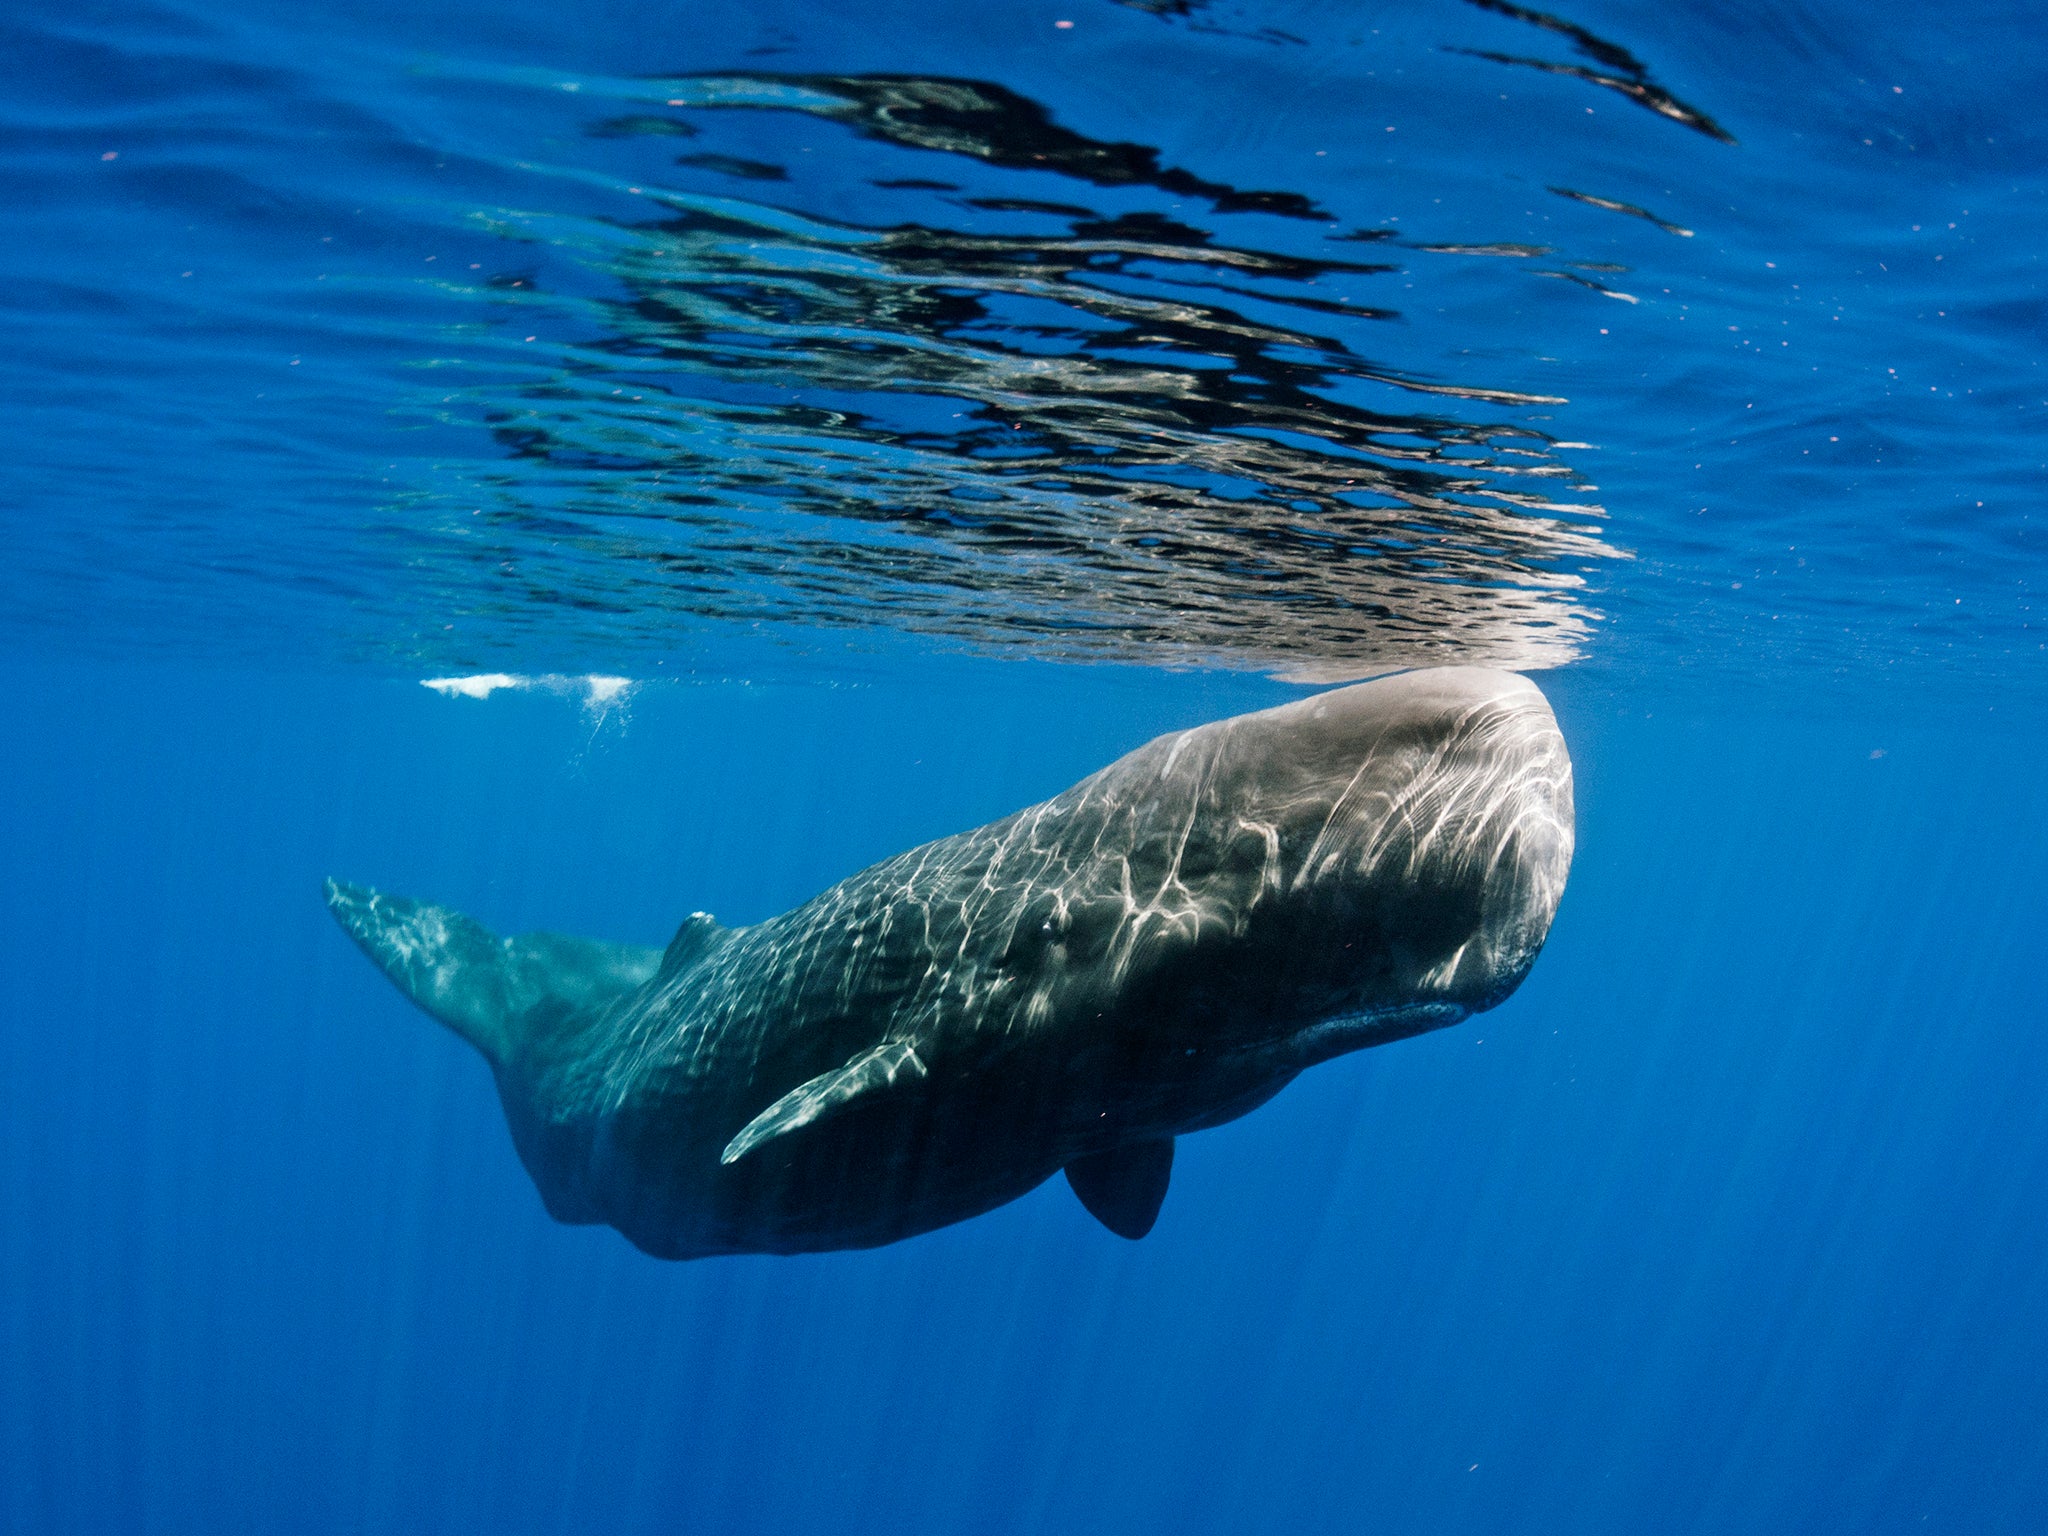 It is unusual to find sperm whales in British waters